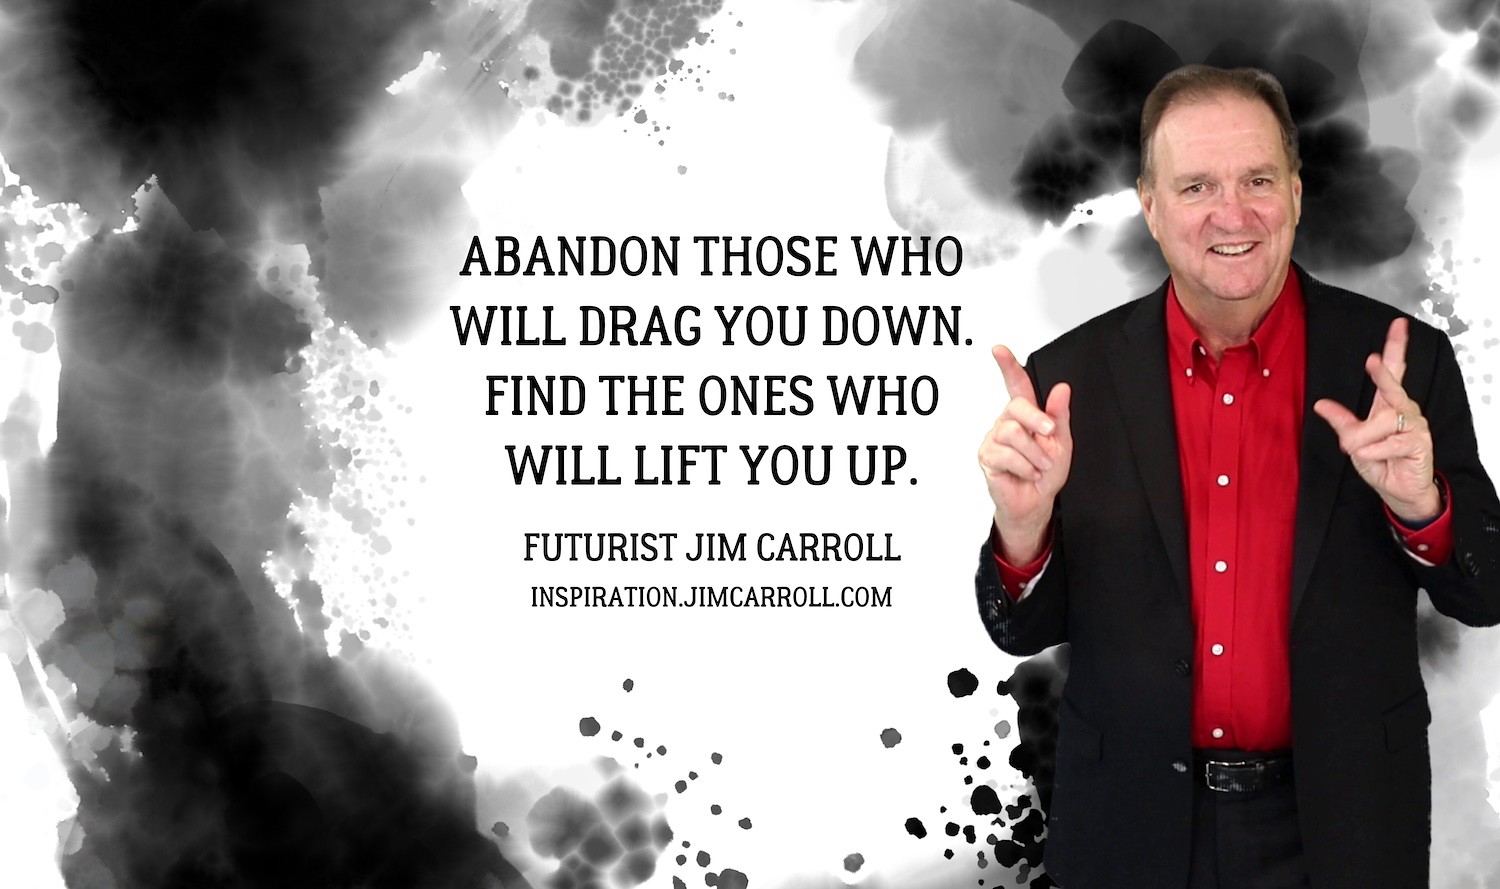 "Abandon those who will drag you down. Find the ones who will lift you up." - Futurist Jim Carroll